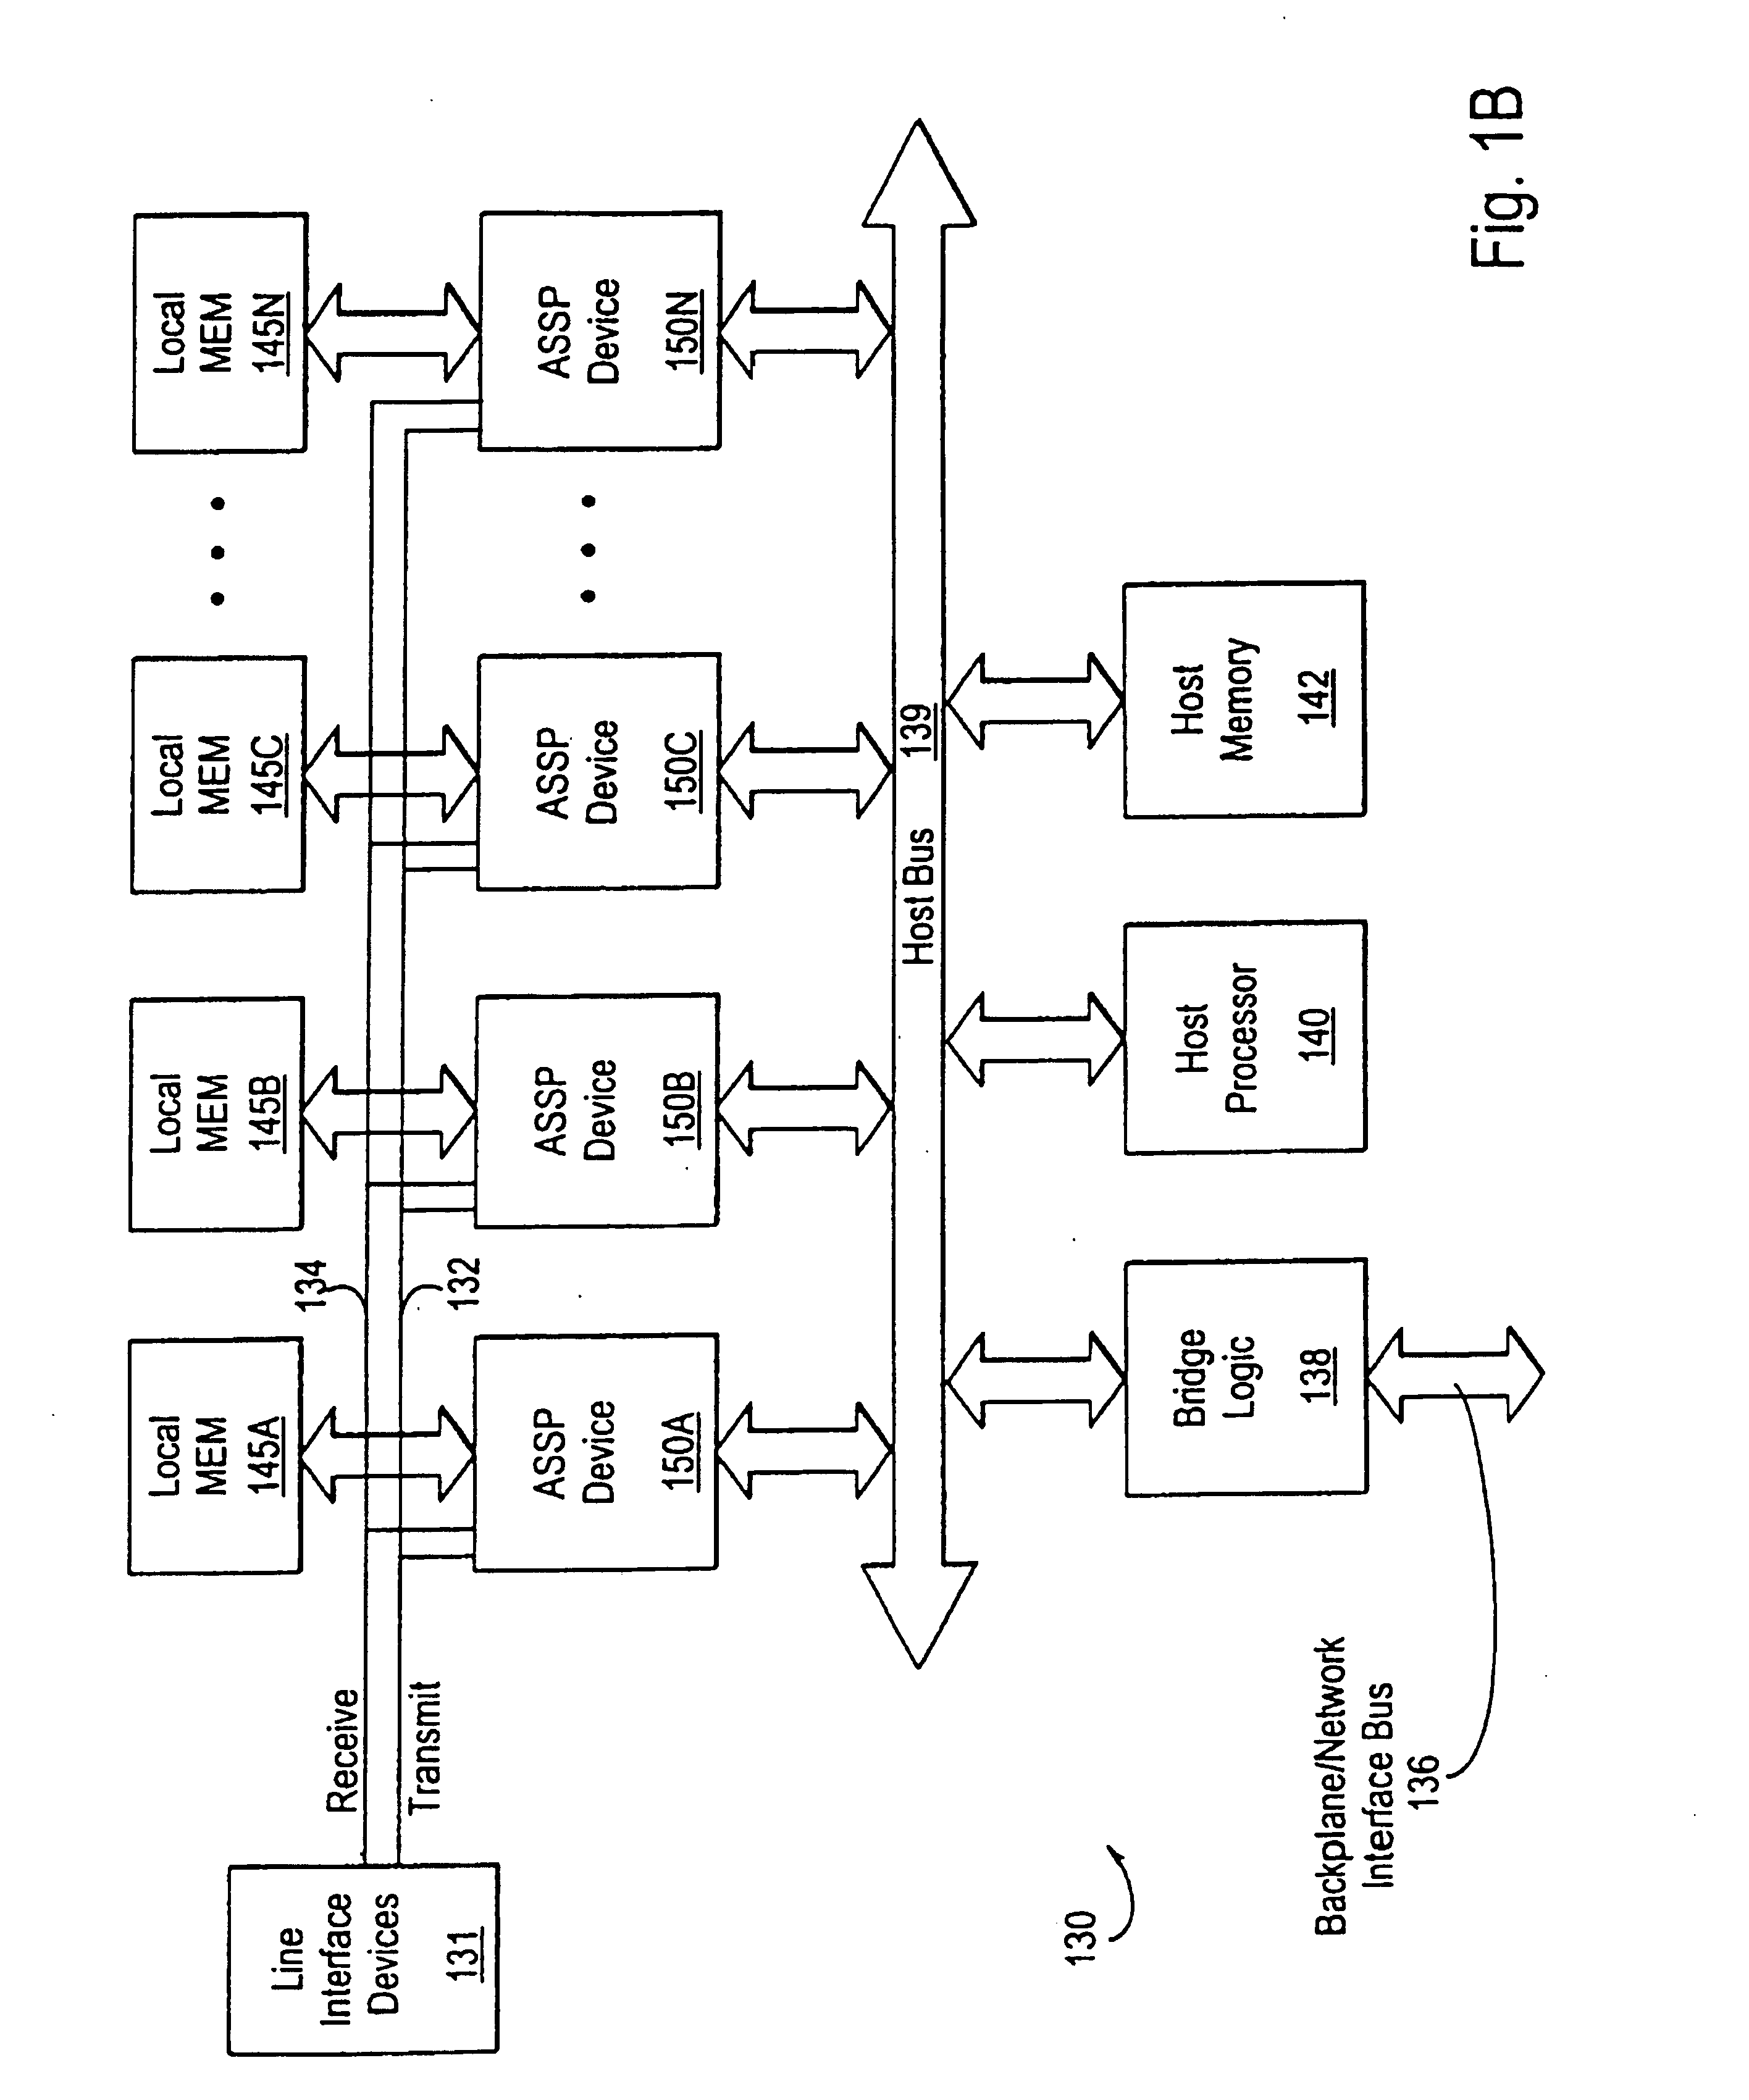 Tone detection for integrated telecommunications processing